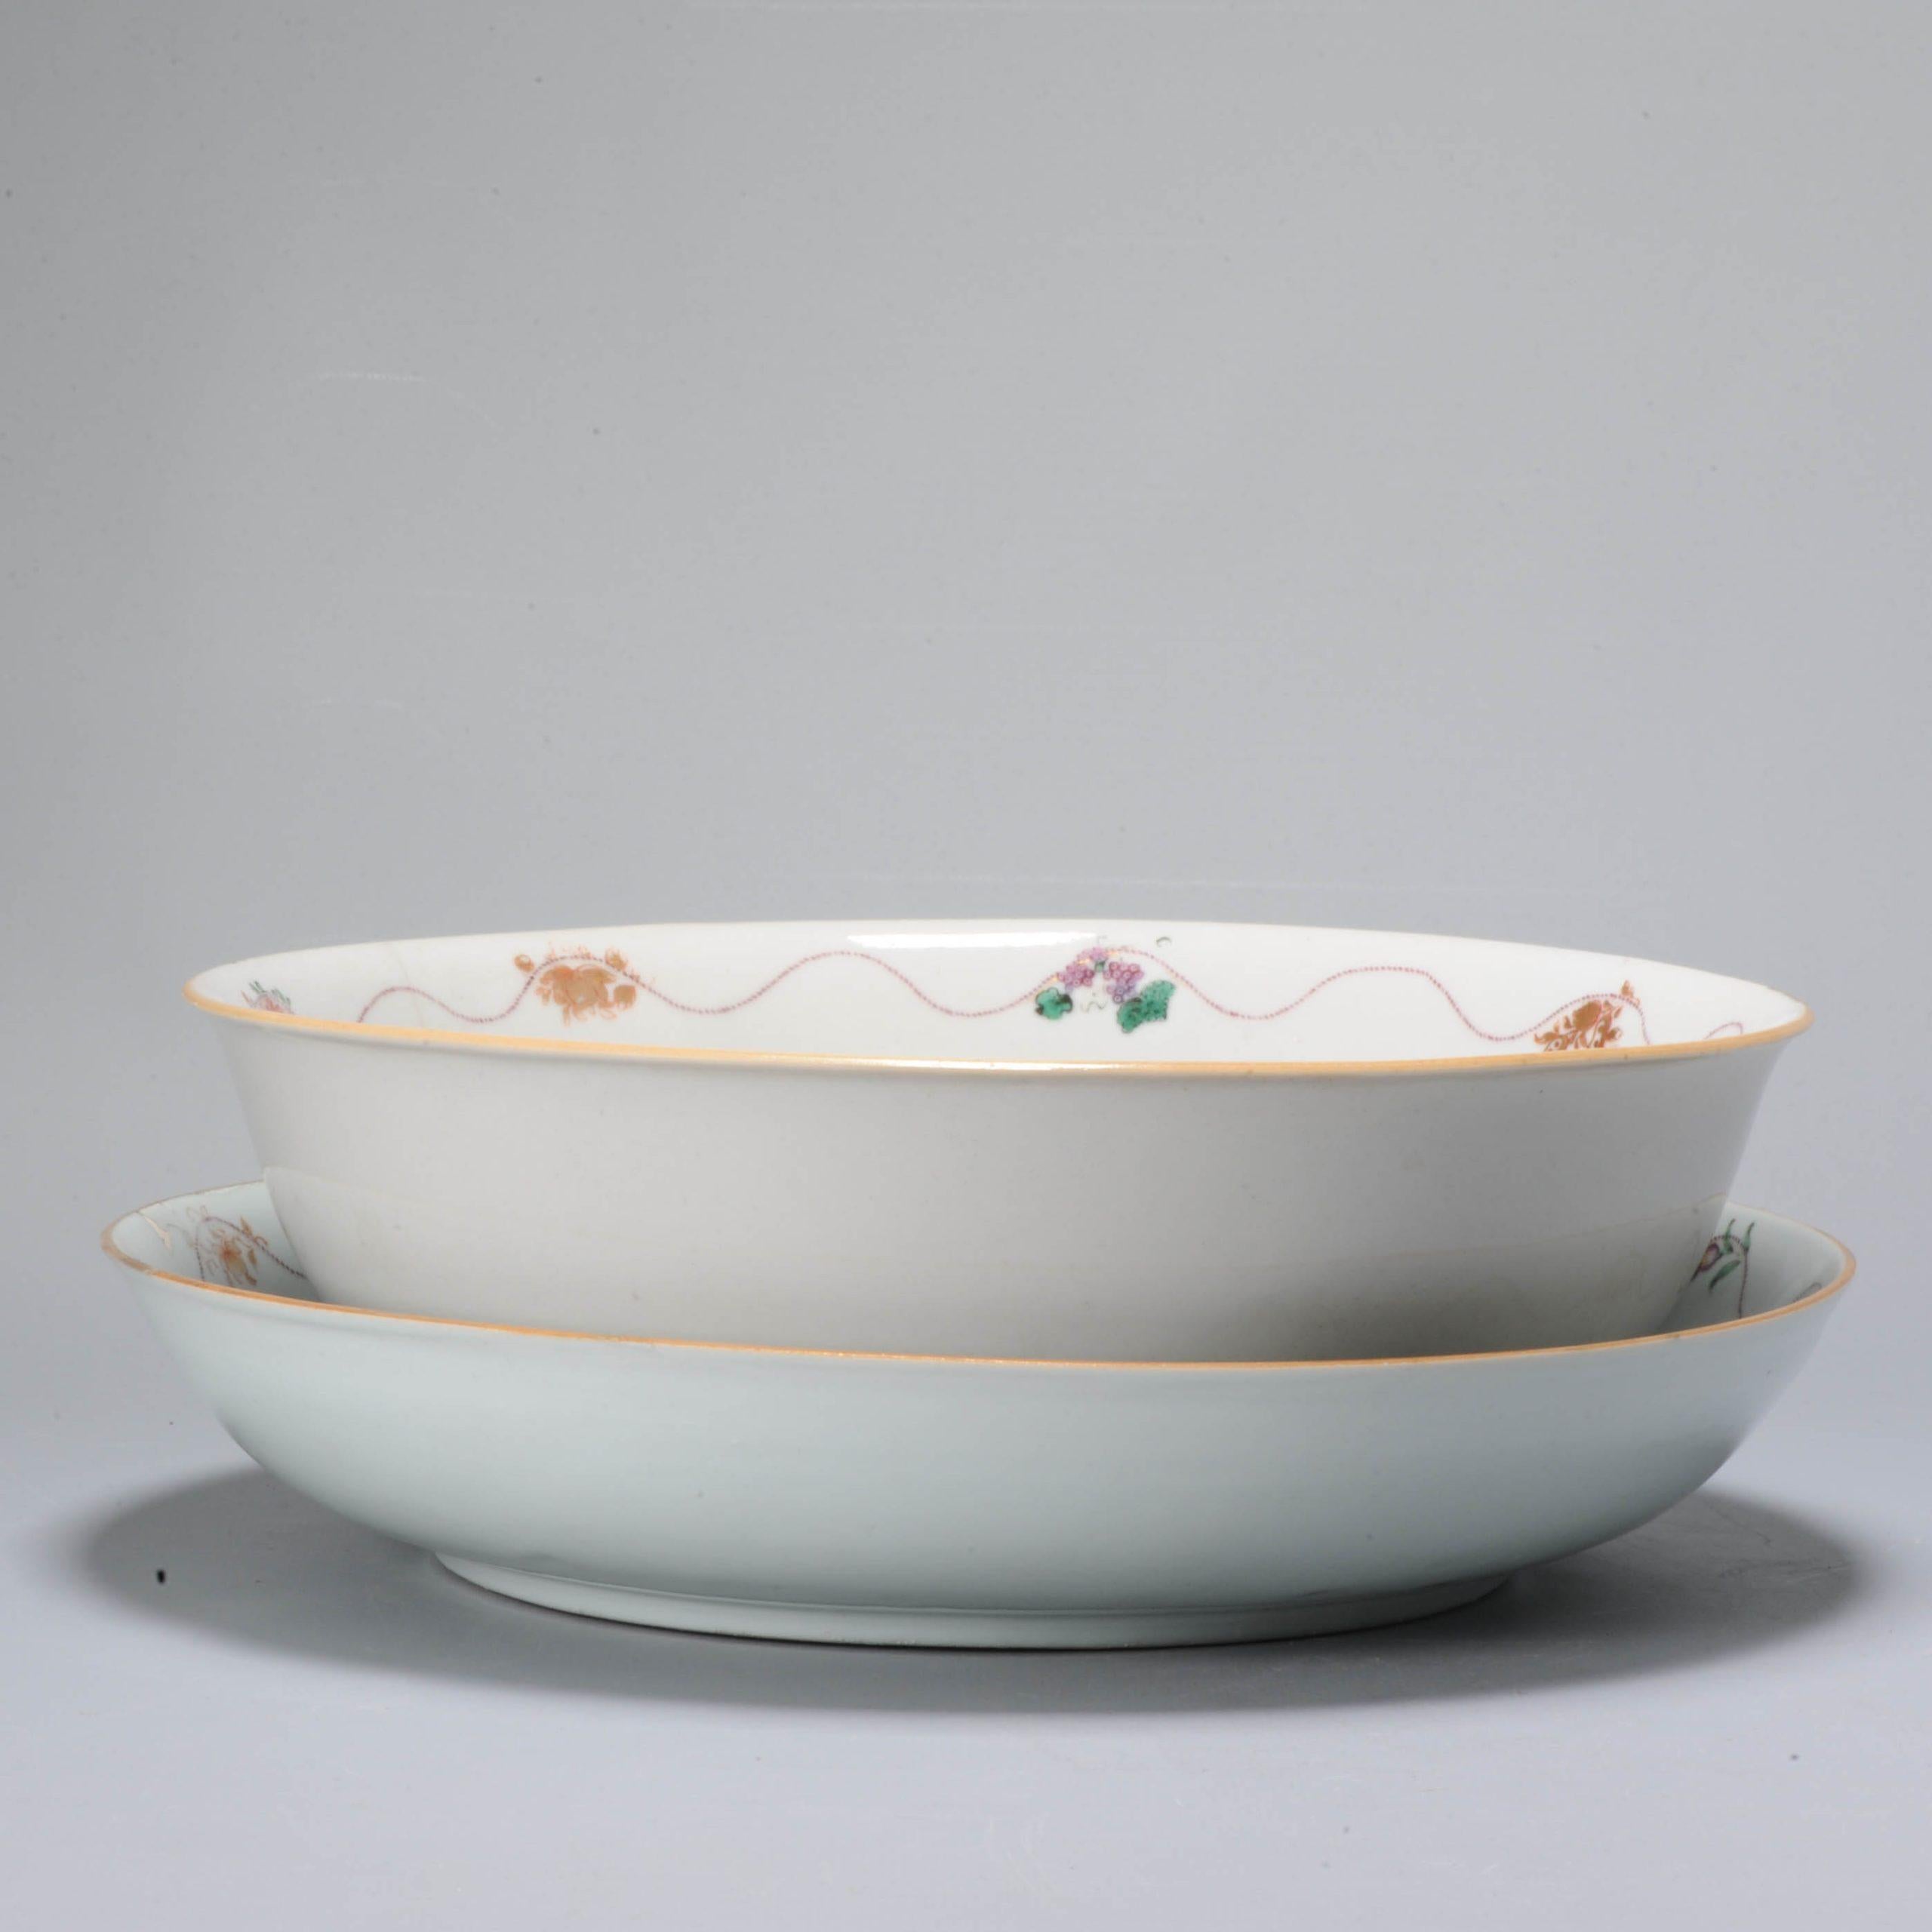 Extremely well decorated bowl and dish. Late Qianlong with a very detailed floral decoration in the style of Giles. Lovely pieces and very decorative.

Additional information:
Material: Porcelain & Pottery
Region of Origin: China
Emperor: Qianlong